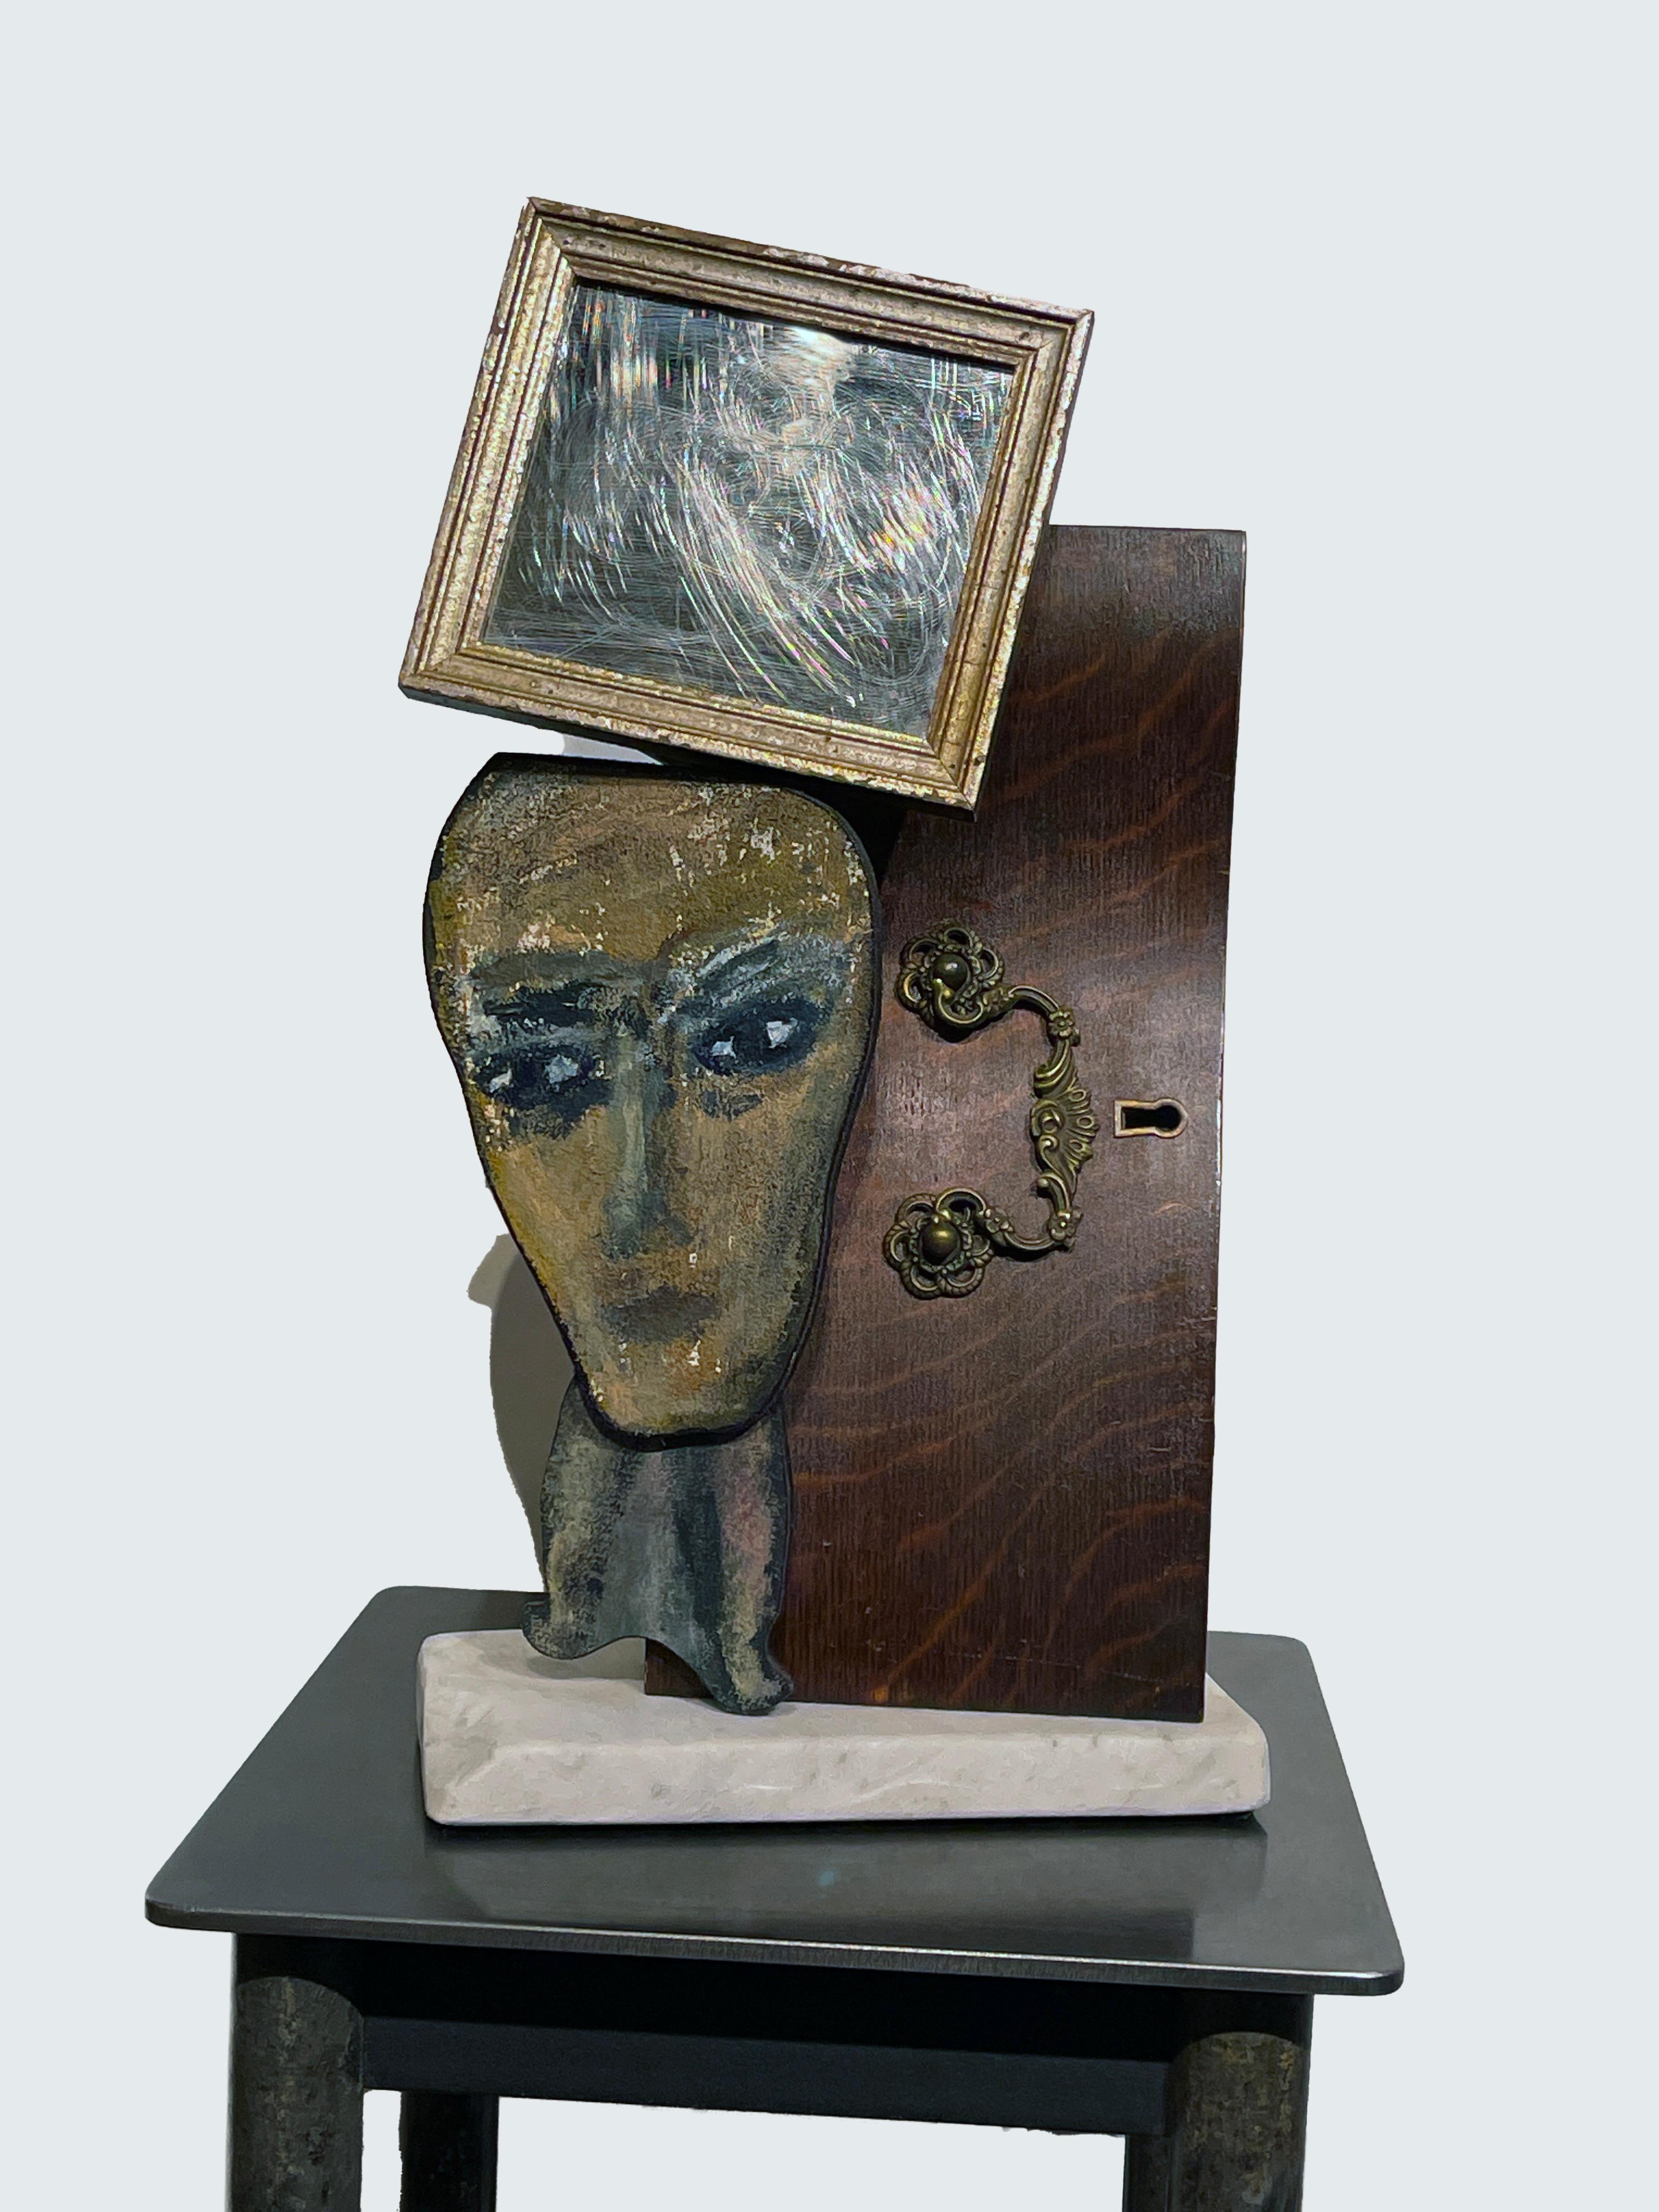 Self-taught artist John Seubert, AKA John Dolly, uses objects he uncovers as he rehabs older homes in Chicago. This piece is constructed with a small framed mirror and a drawer front complete with hardware which form the backdrop to a small portrait